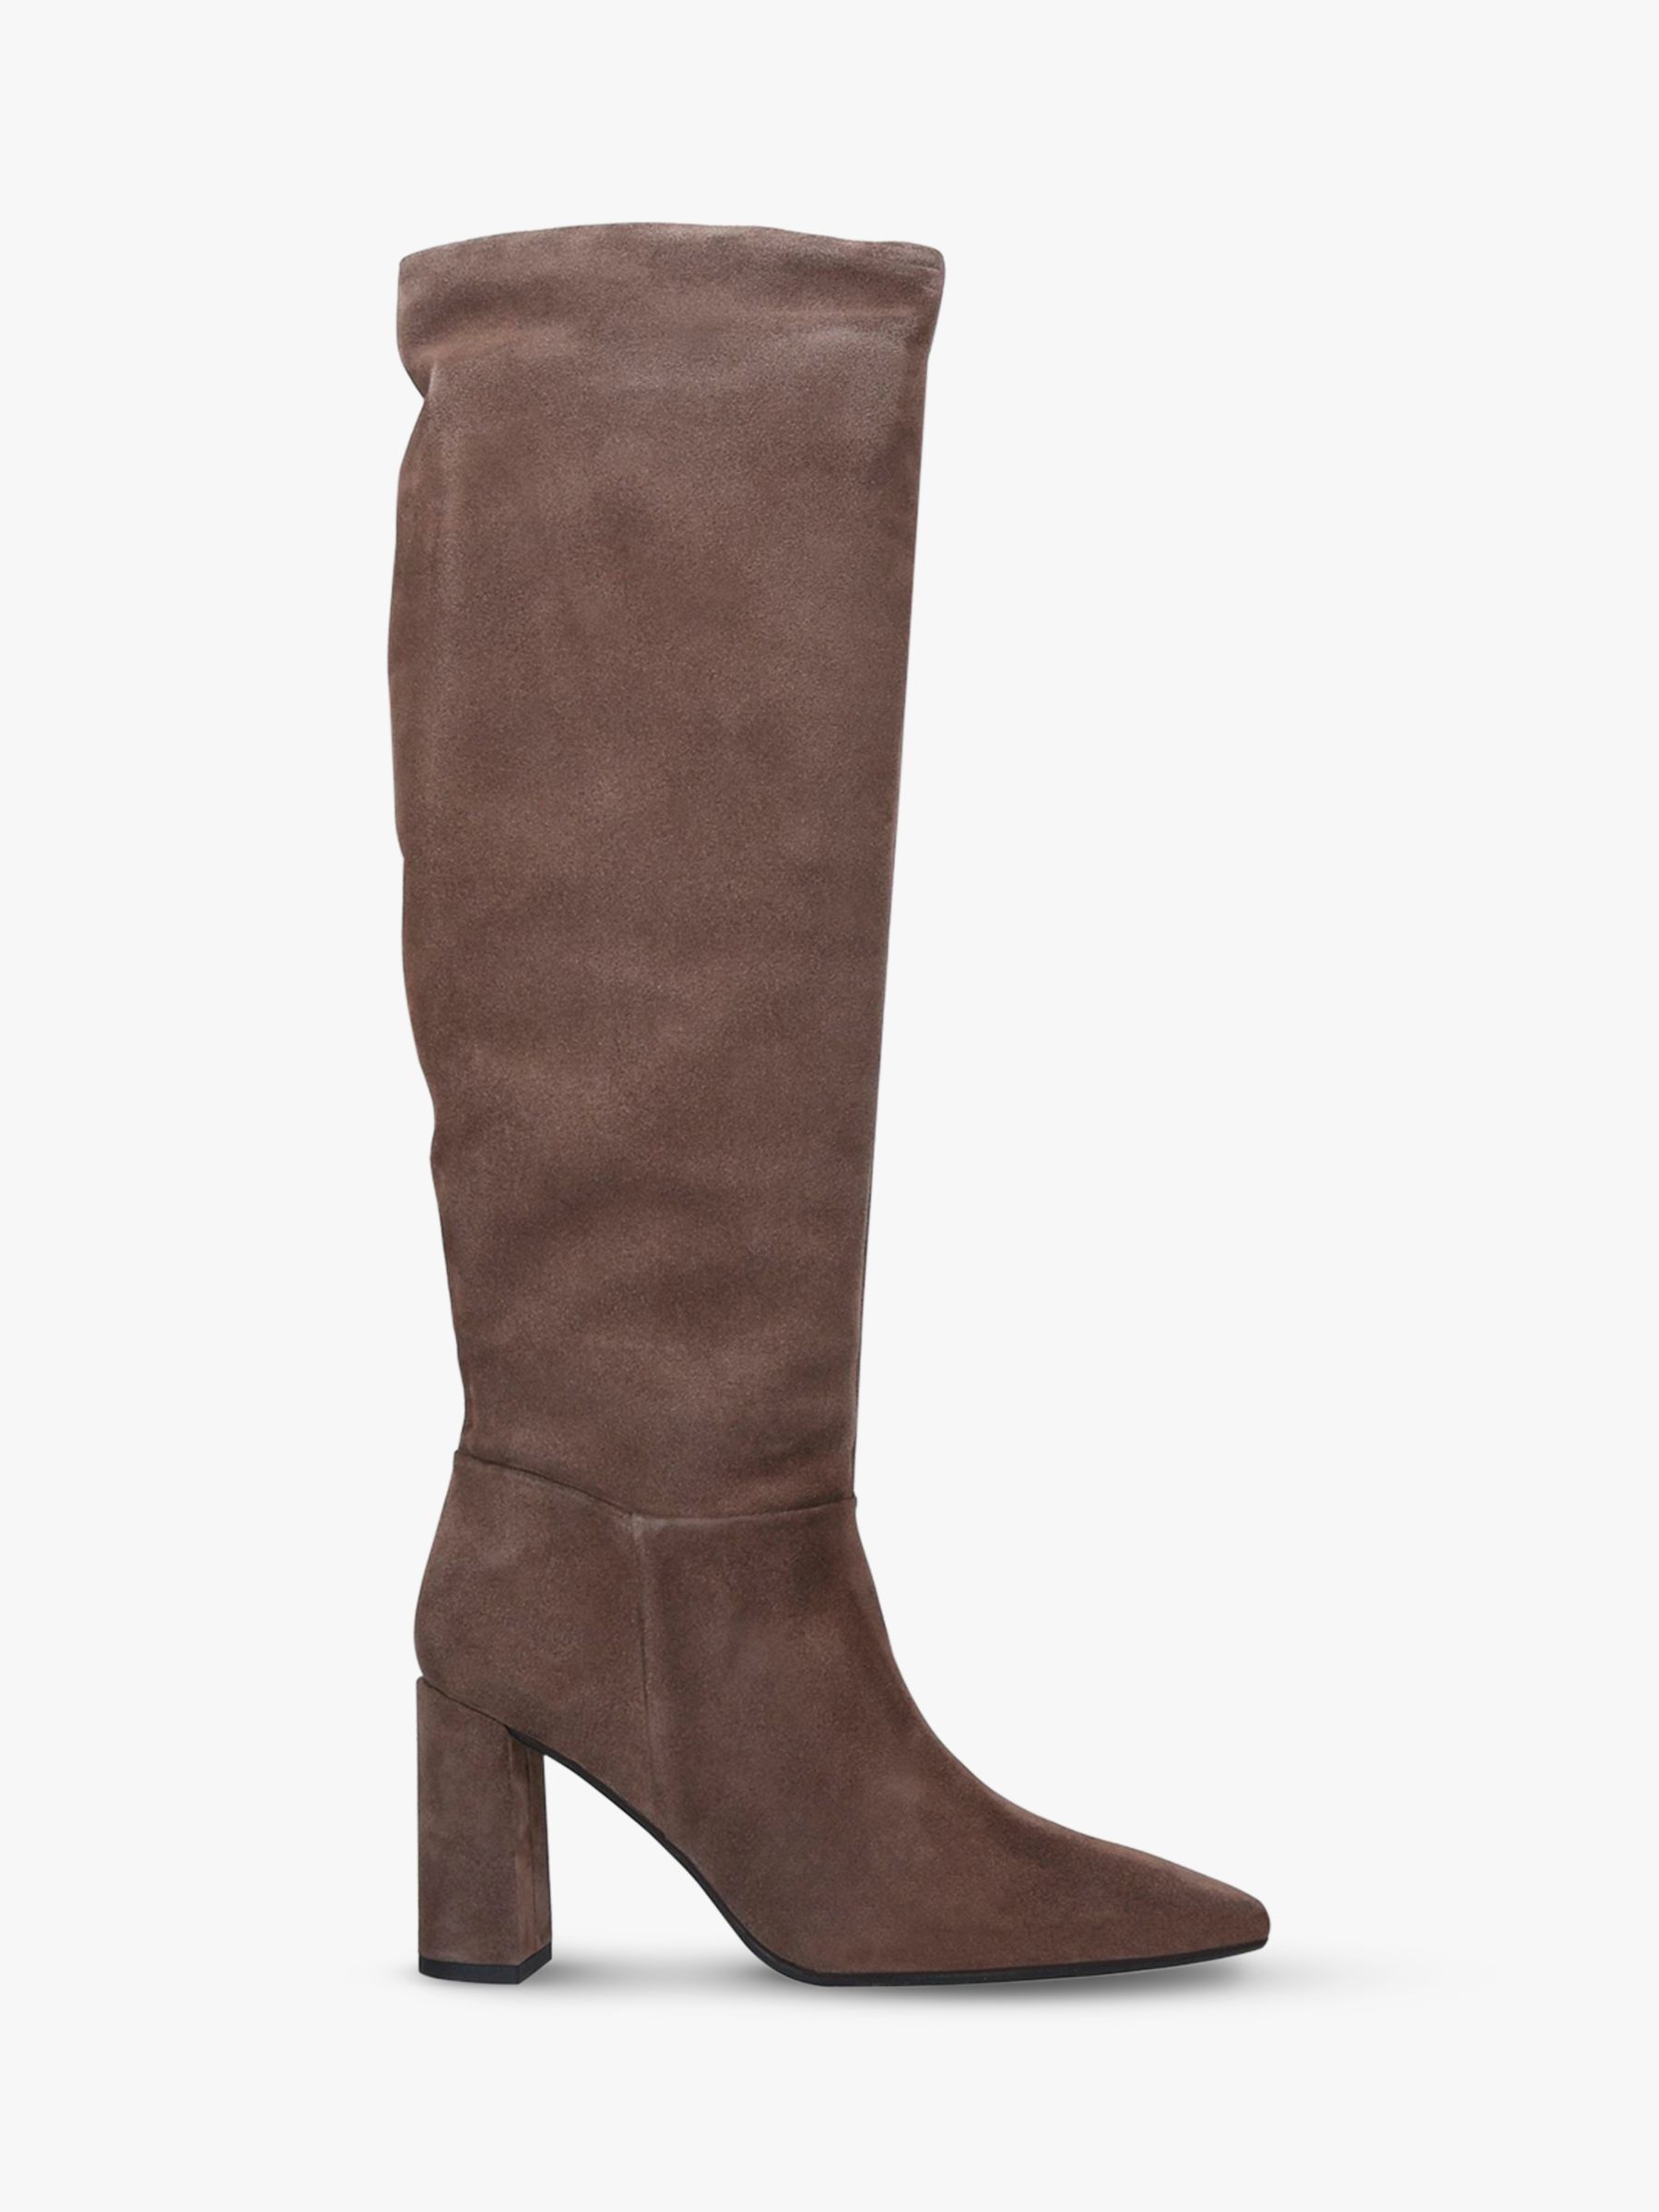 Carvela Wisp Suede Knee High Boots, Taupe at John Lewis & Partners